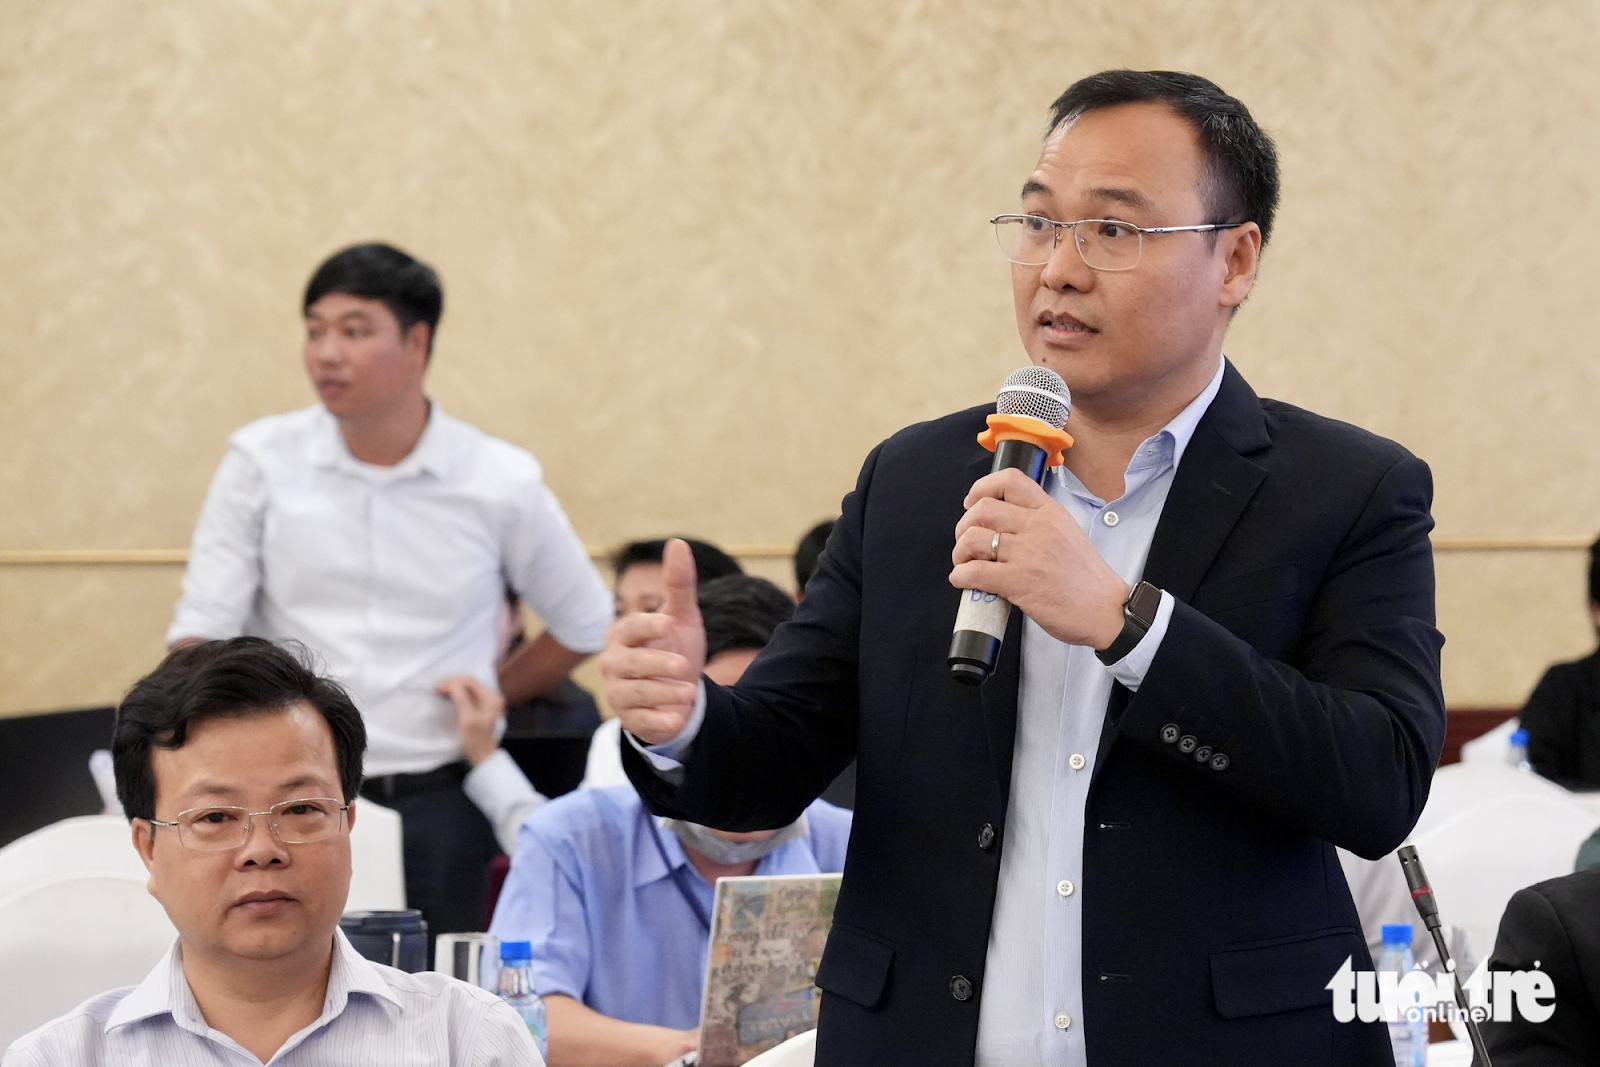 <em>Ho Quynh Hung, chairman of Dien Quang Lamp JSC, speaks at the seminar in Ho Chi Minh City, February 28, 2023. Photo:</em> Huu Hanh / Tuoi Tre